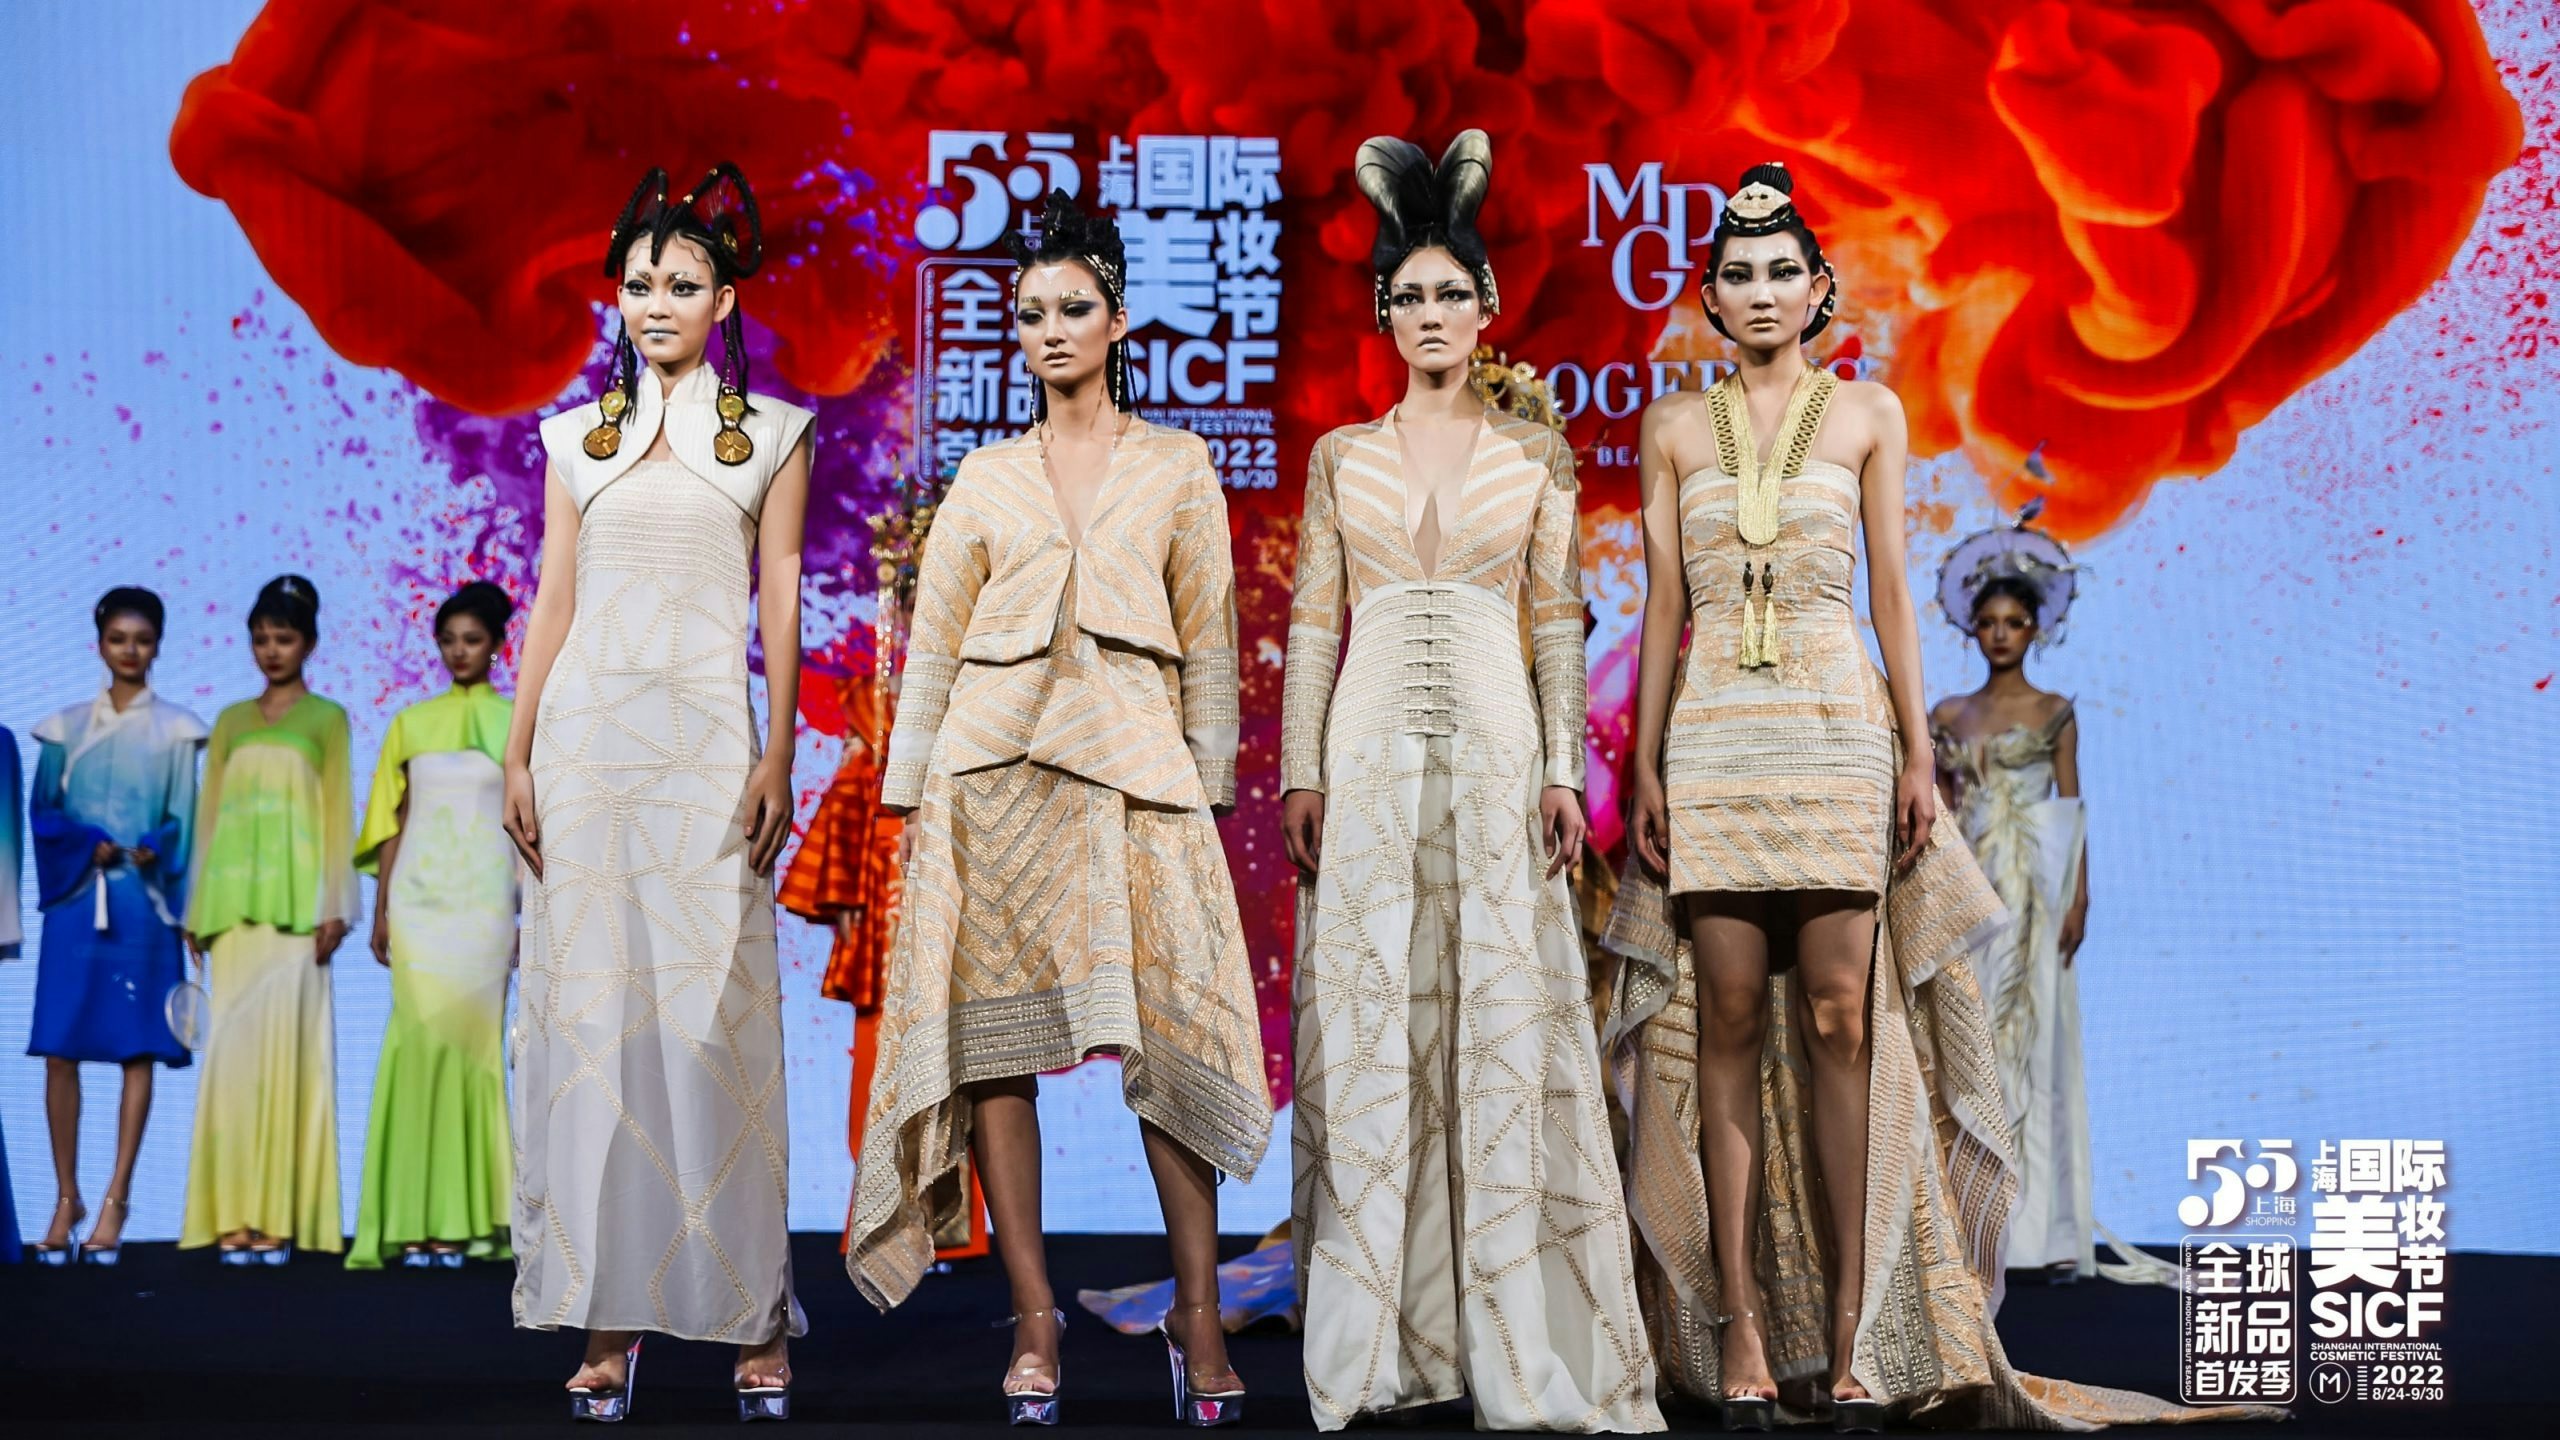 At Shanghai’s International Cosmetic Festival, beauty brands like Prada, Fenty,  and L’Oreal will launch new products online, offline, and in the metaverse. Photo: SICF via China Daily